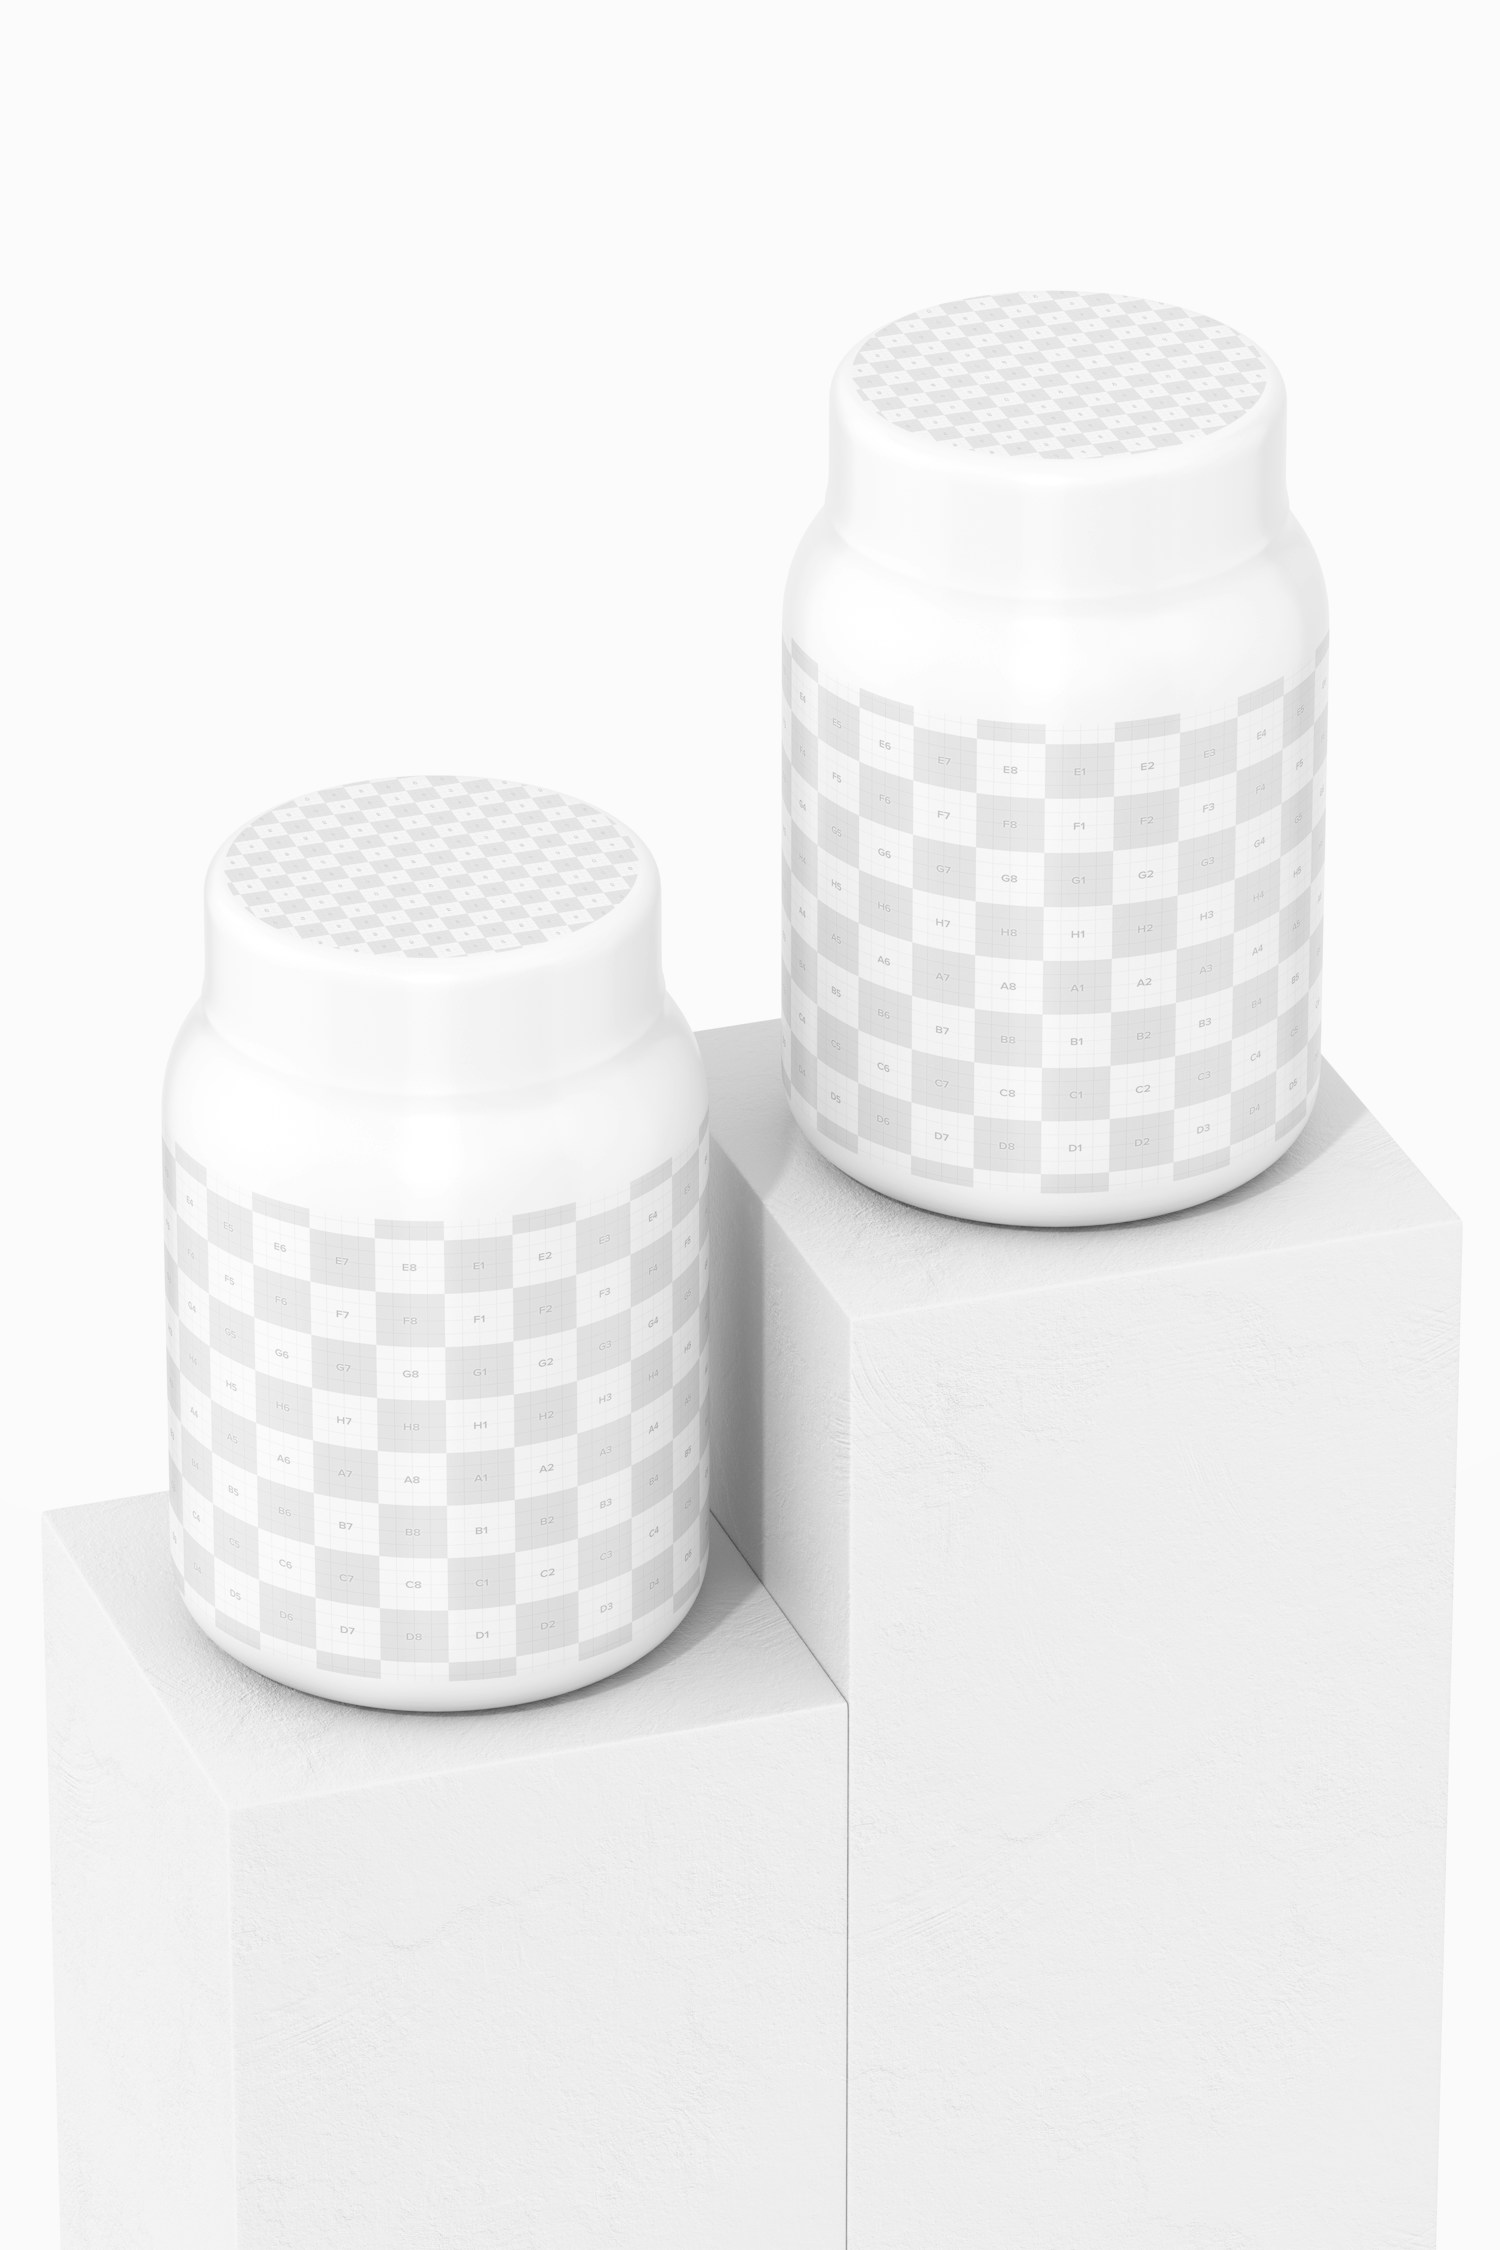 20 gr Protein Powder Containers Mockup